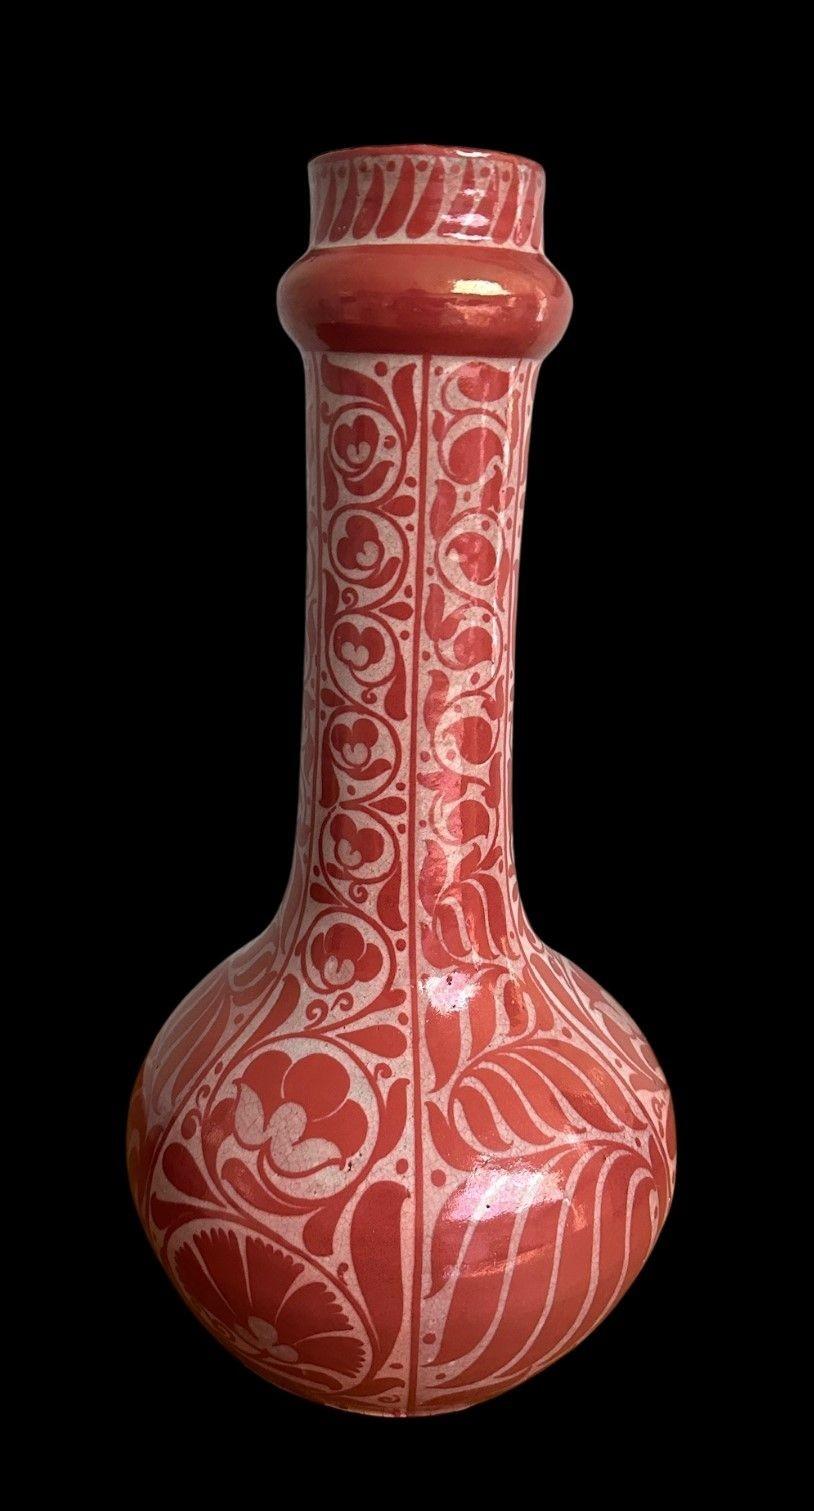 5482
William De Morgan Ruby Lustre Vase decorated with Carnations and scrolling flowers and foliage
See Greenwoon “The Designs of William De Morgan” Pg 205 for similar examples
35 cm high, 18cm wide
Circa 1880